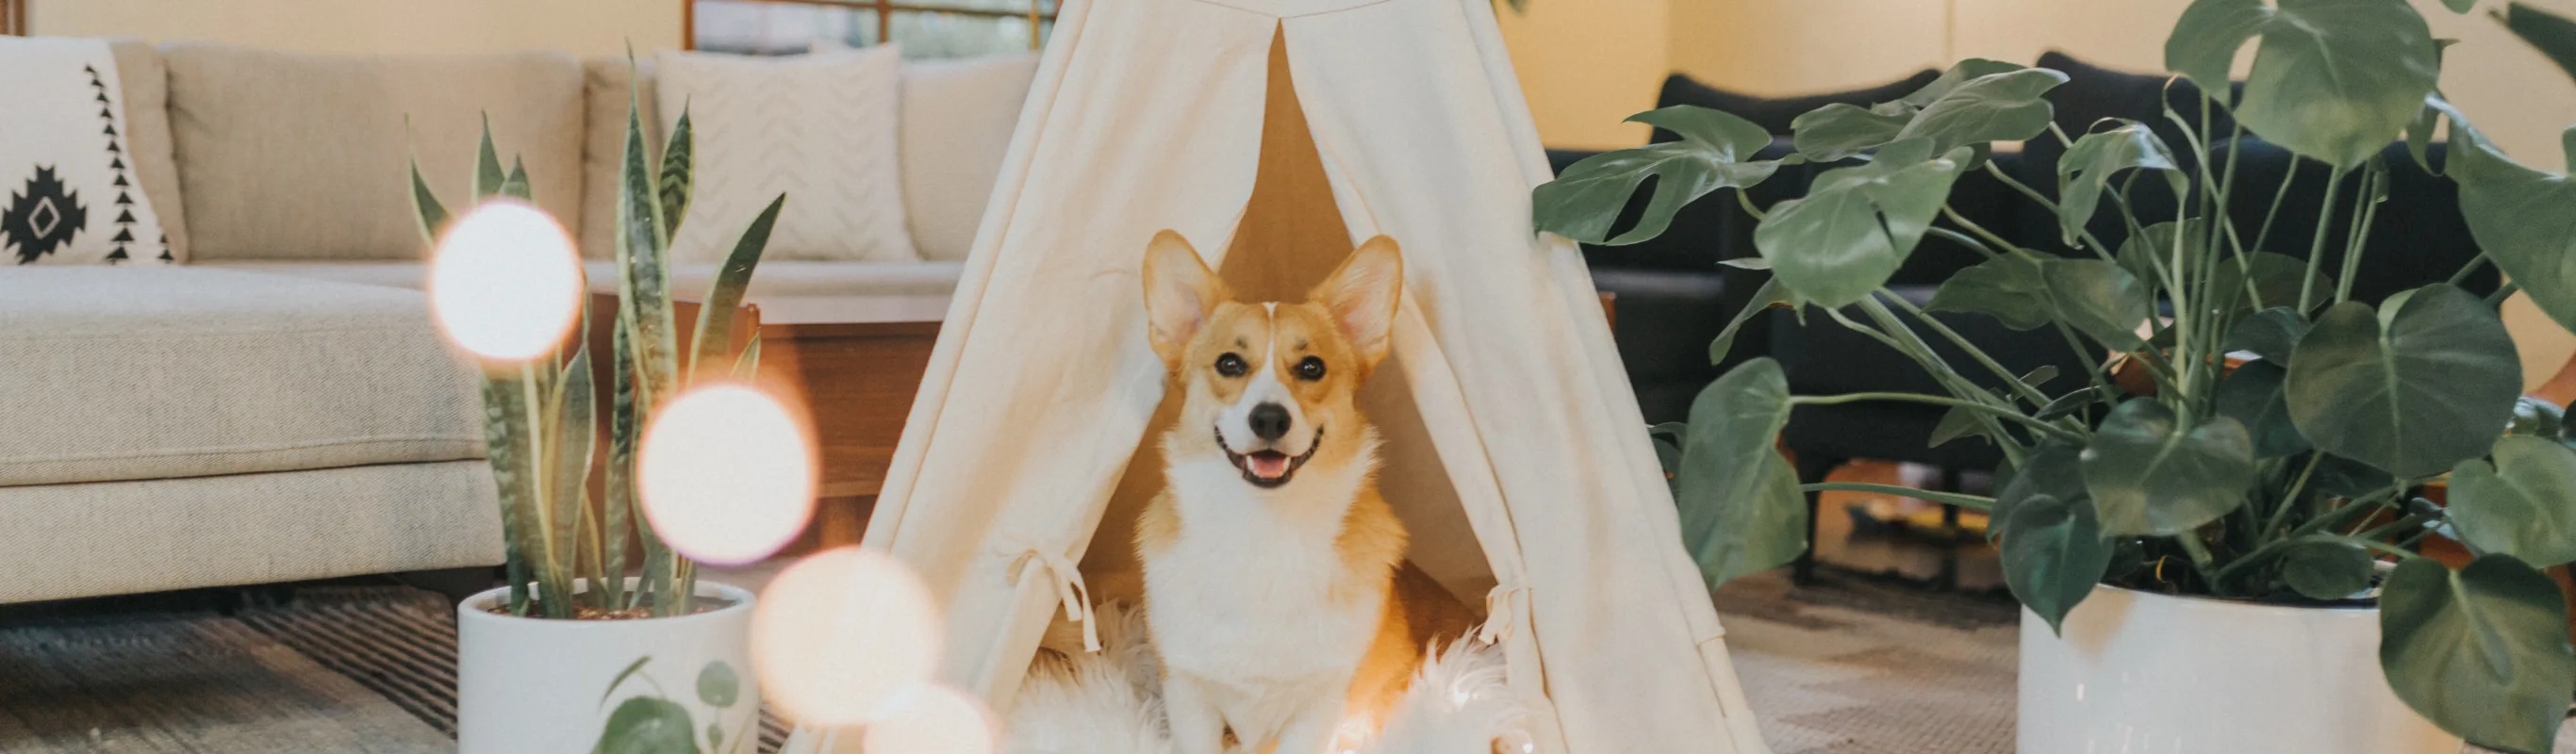 dog inside a small tent